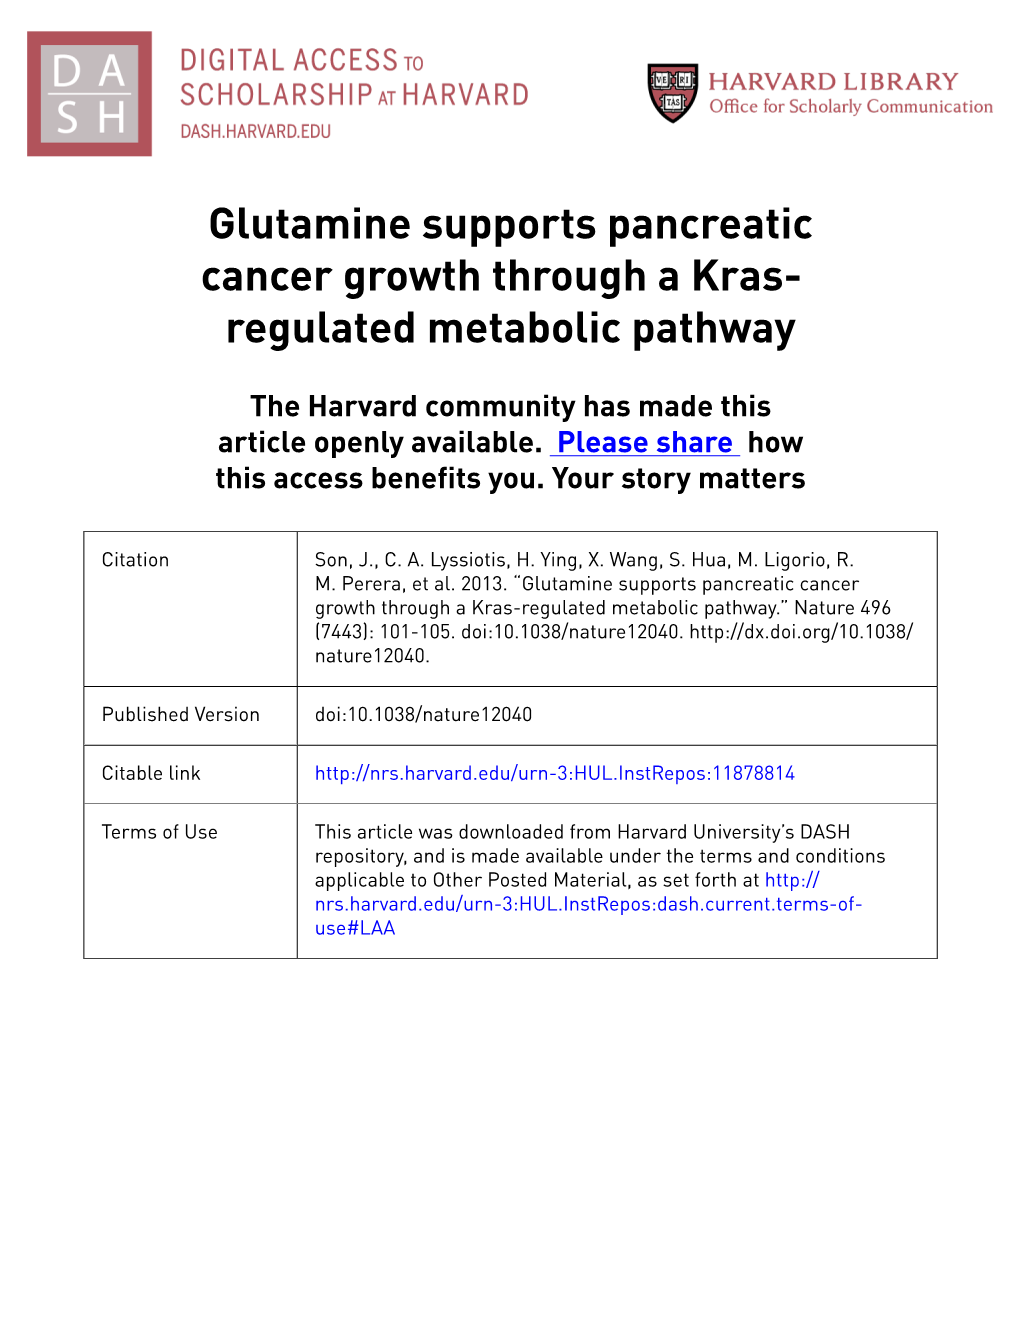 Glutamine Supports Pancreatic Cancer Growth Through a Kras- Regulated Metabolic Pathway